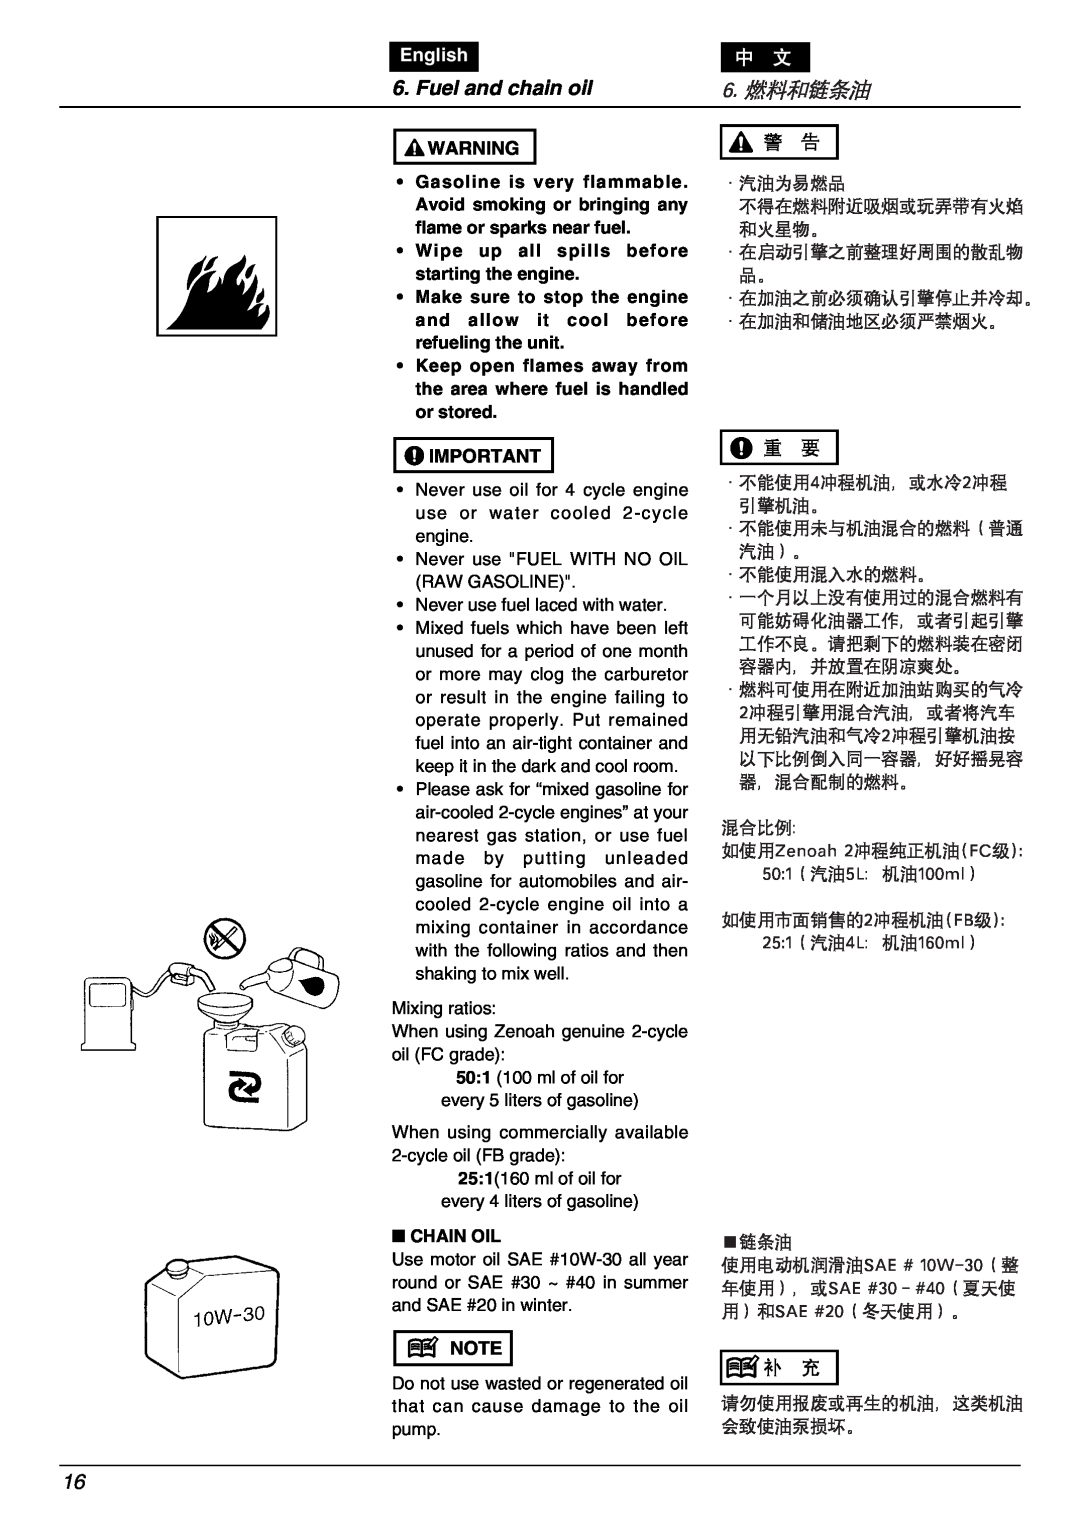 Zenoah PSJ2300 Fuel and chain oil, 6. 燃料和链条油, Wipe up all spills before starting the engine, Chain Oil, English 